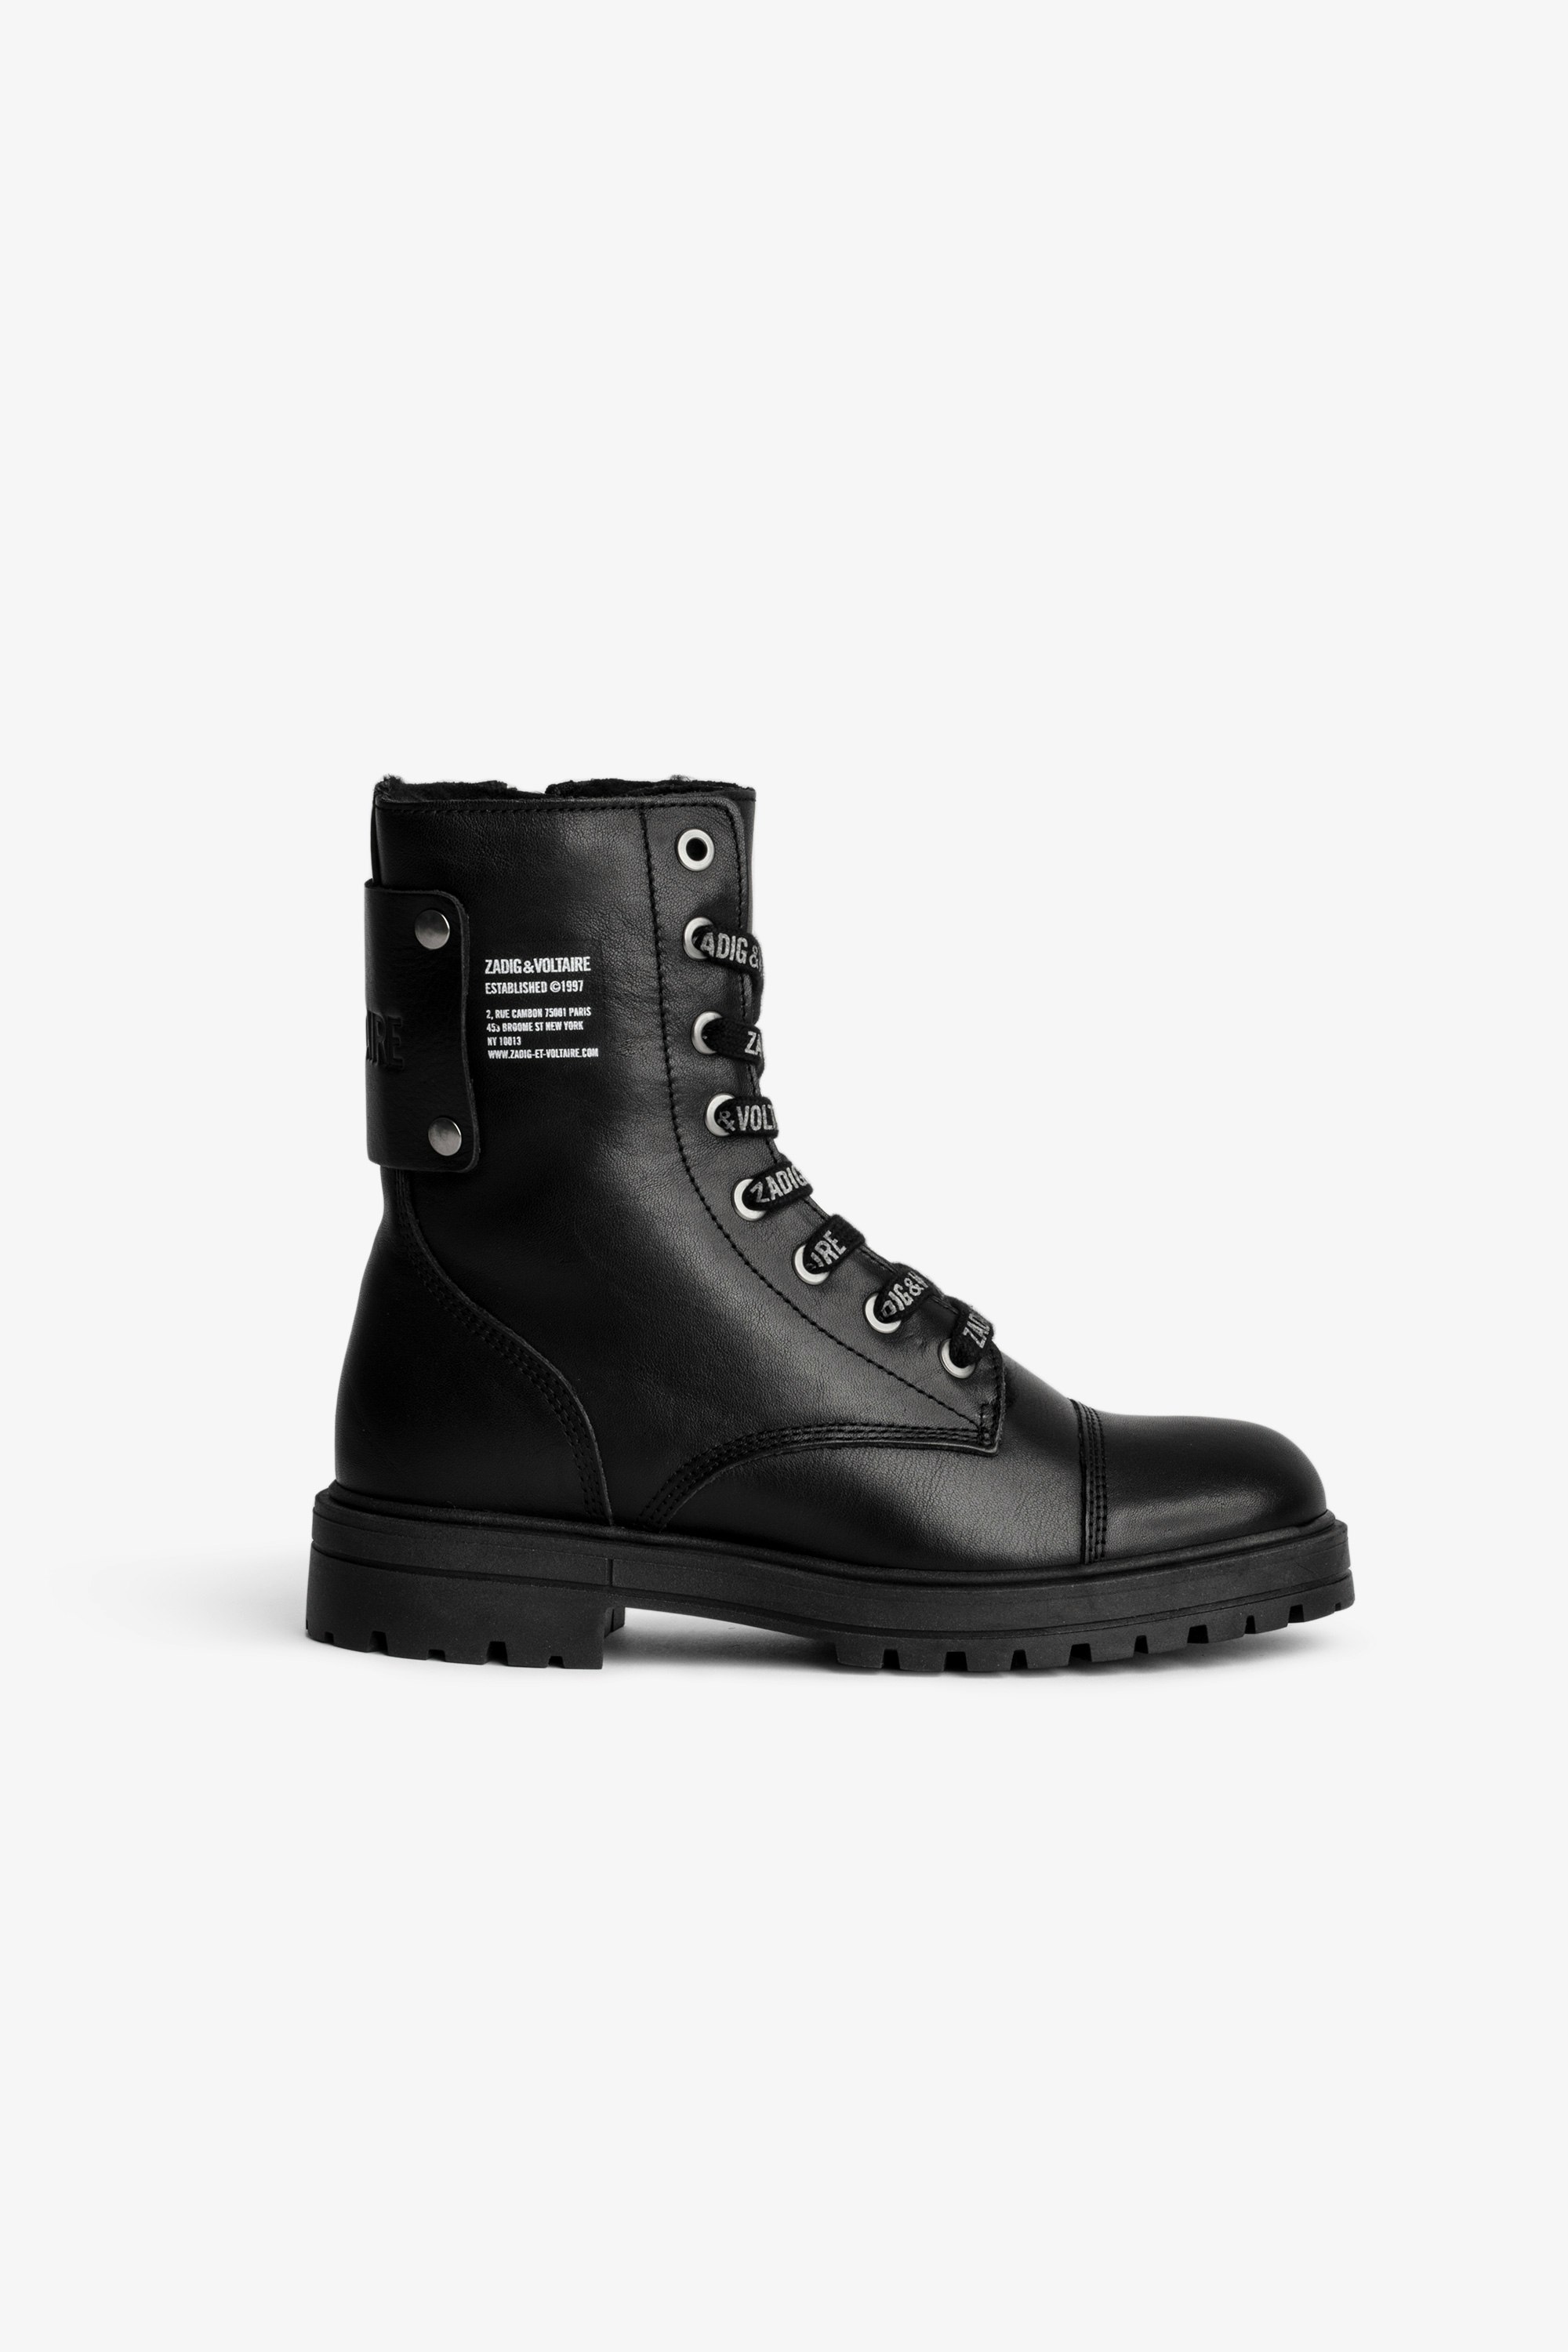 Joe Children’s Boots Children’s black leather mid-high boots with insignia print 